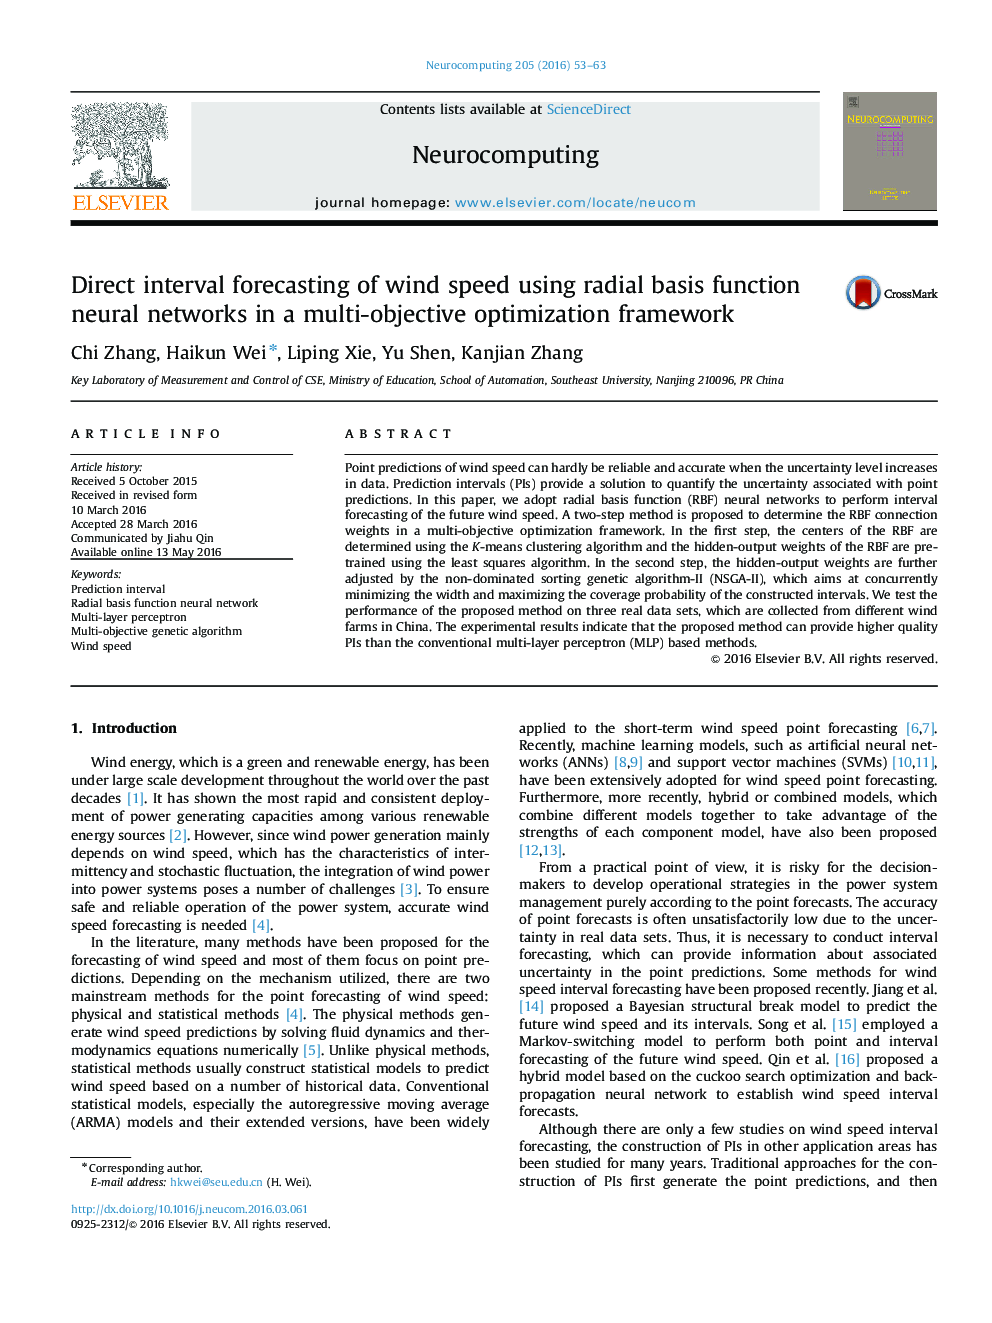 Direct interval forecasting of wind speed using radial basis function neural networks in a multi-objective optimization framework